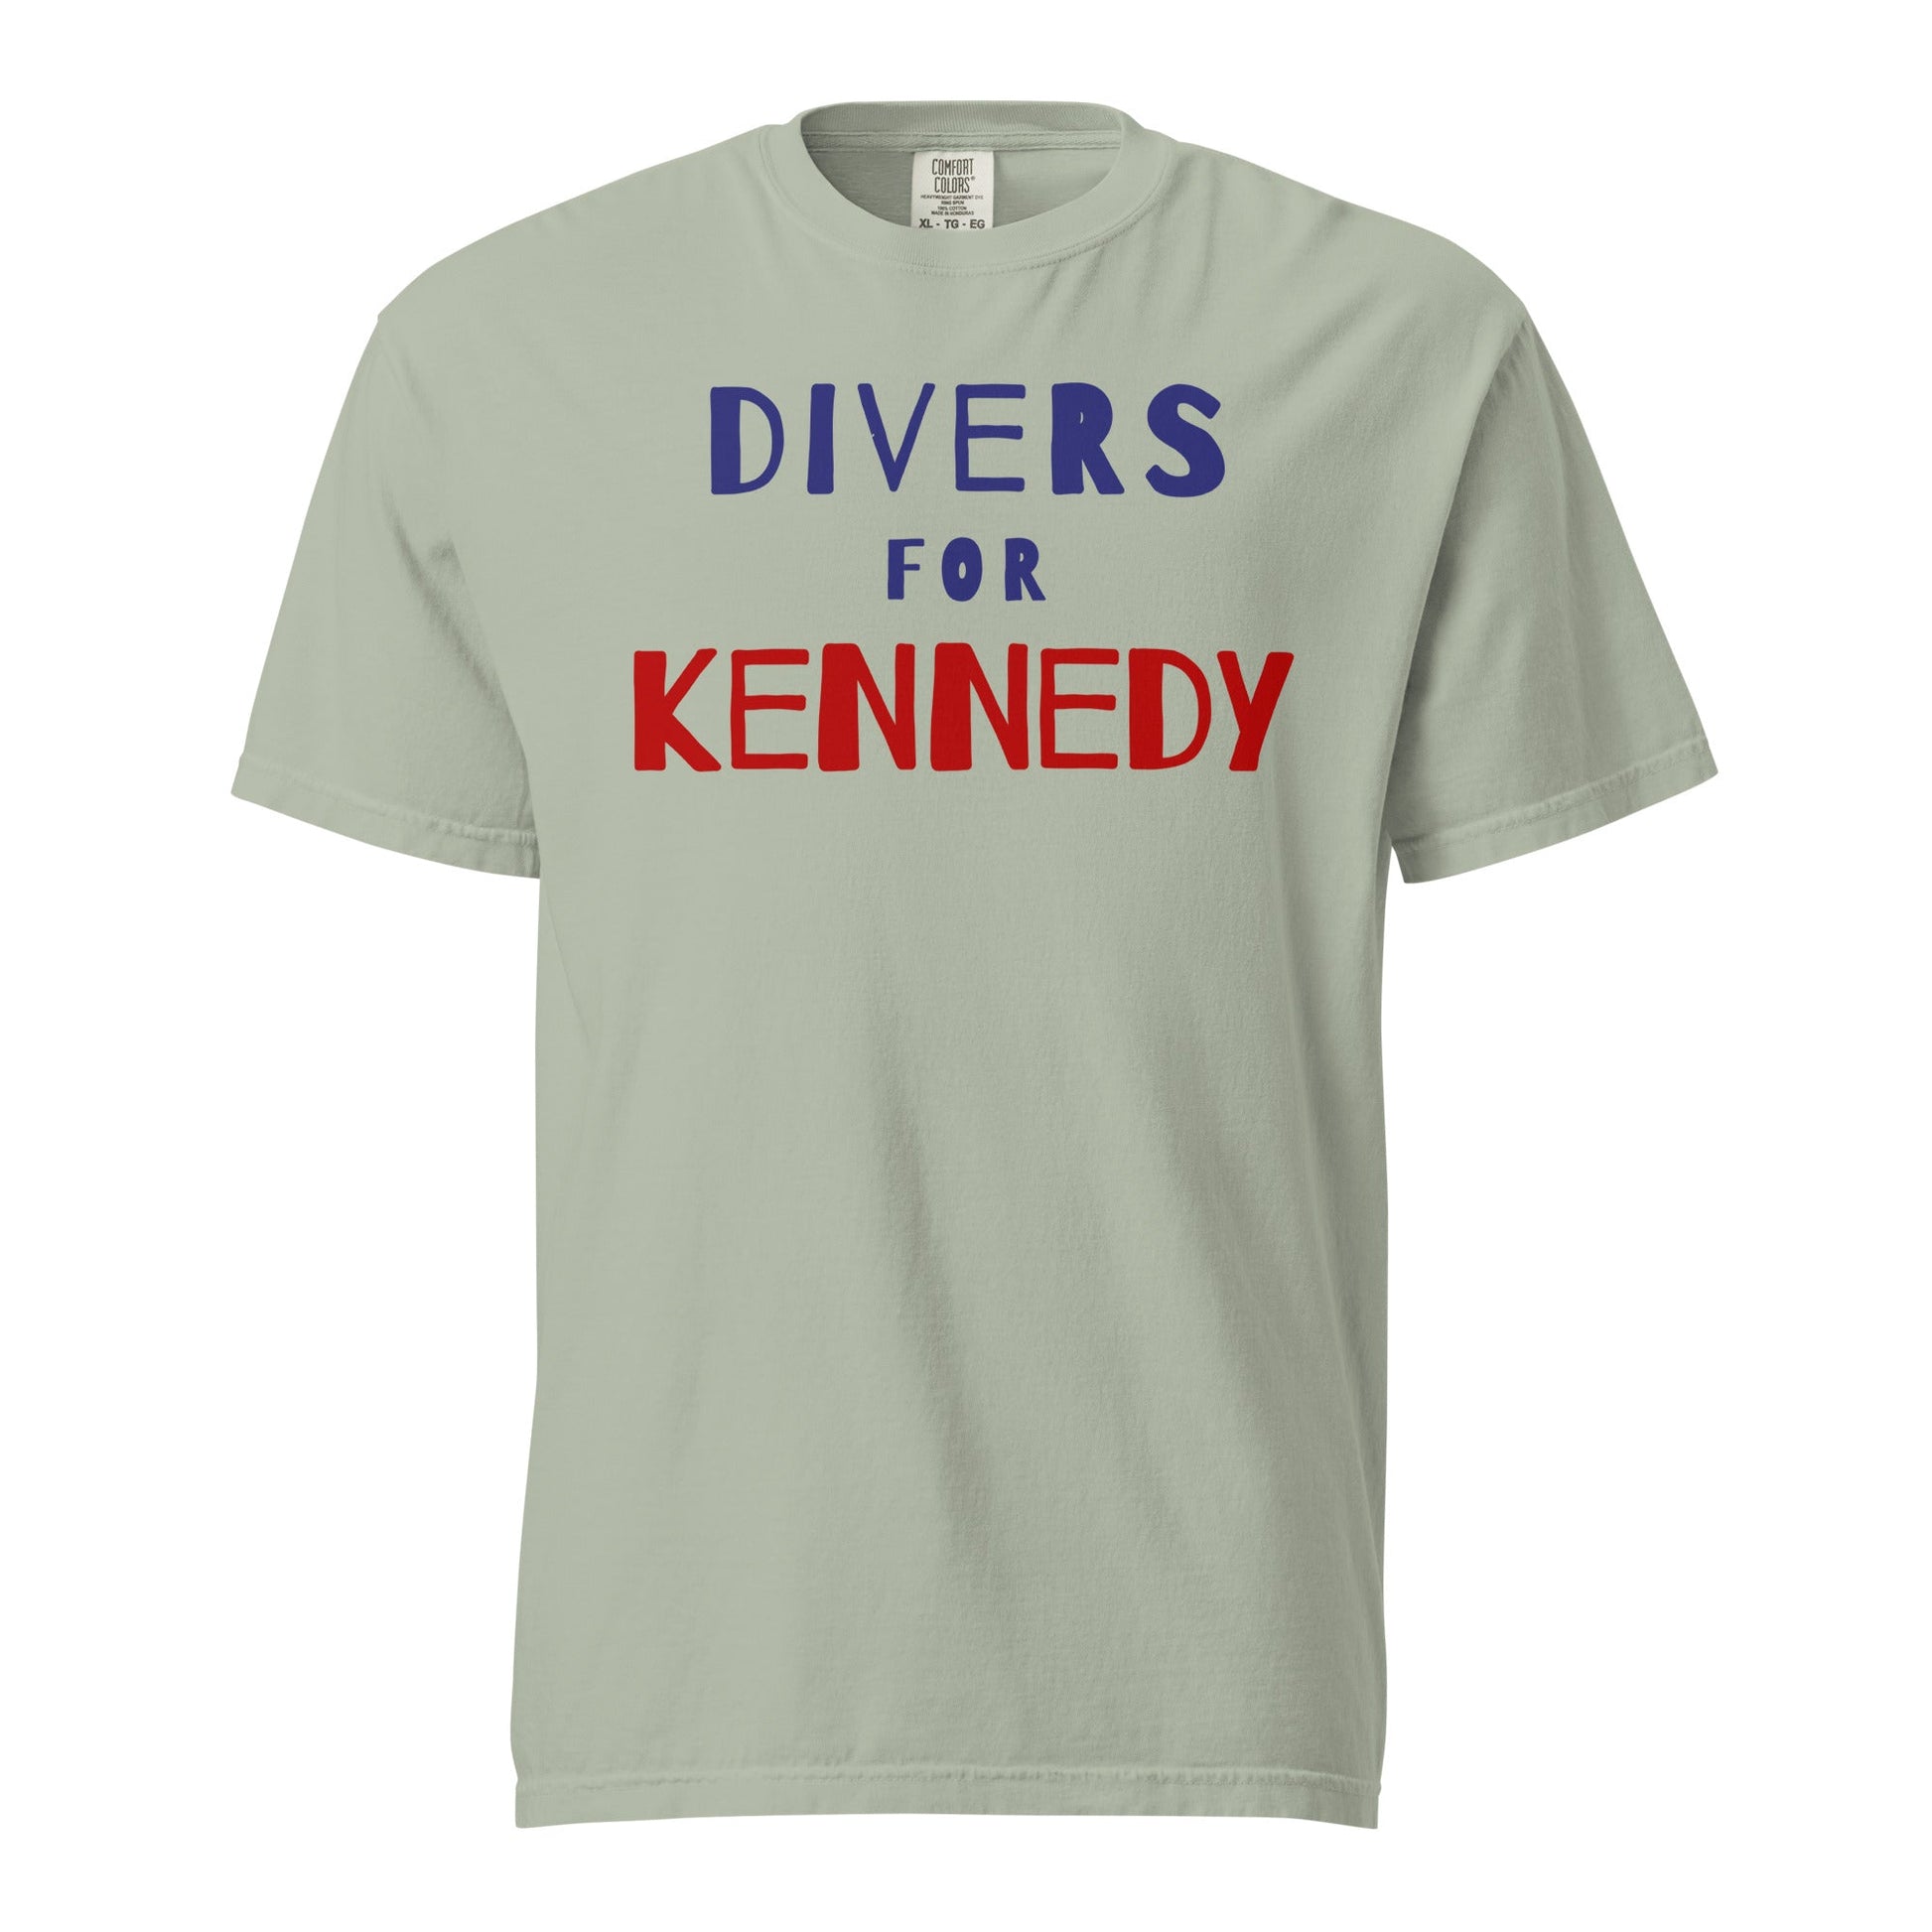 Divers for Kennedy Unisex Heavyweight Tee - TEAM KENNEDY. All rights reserved